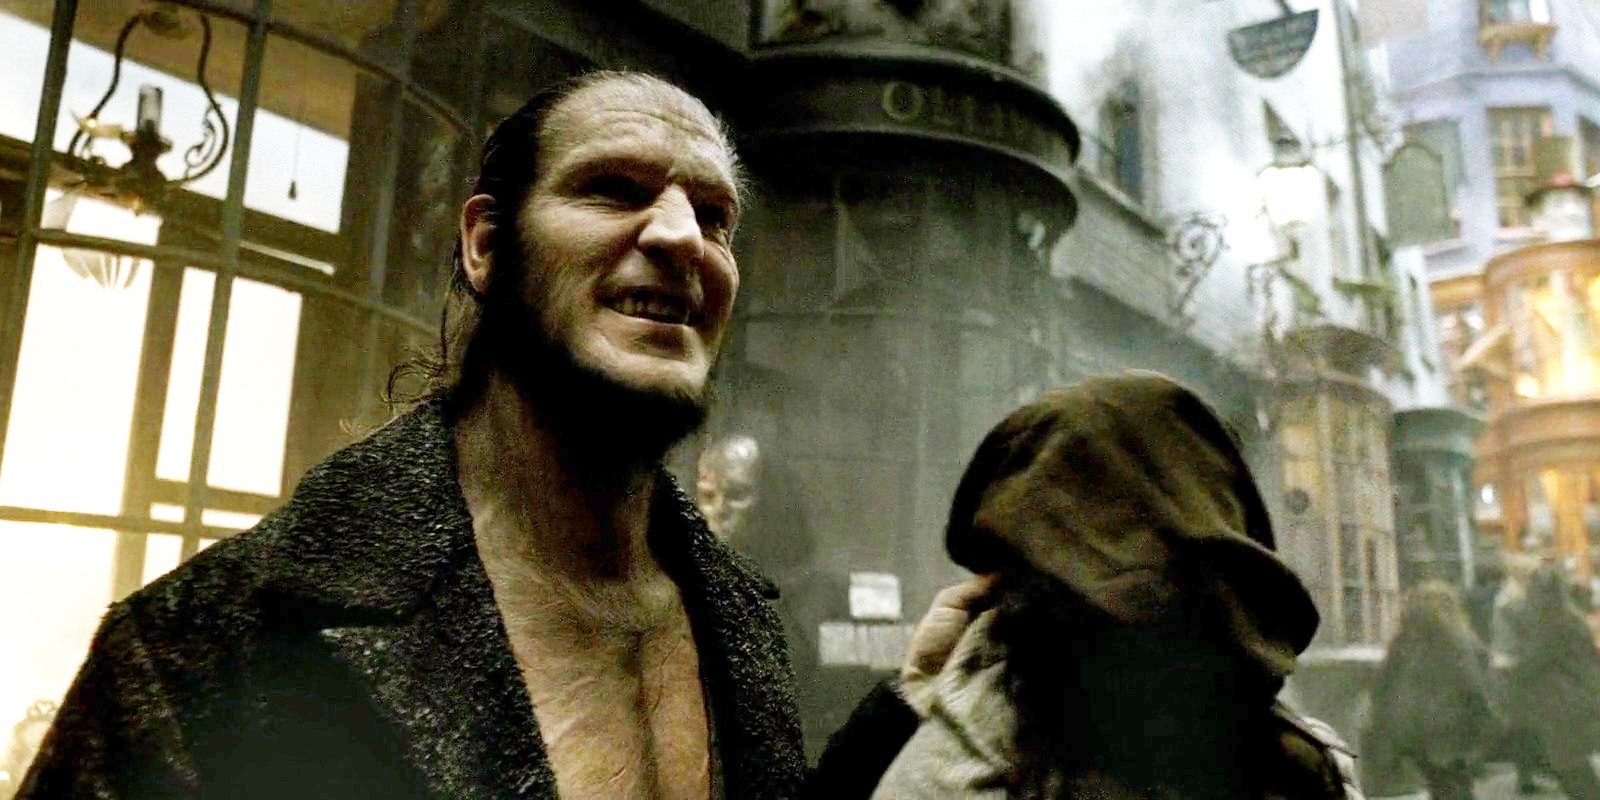 Fenrir Greyback in the Harry Potter movies